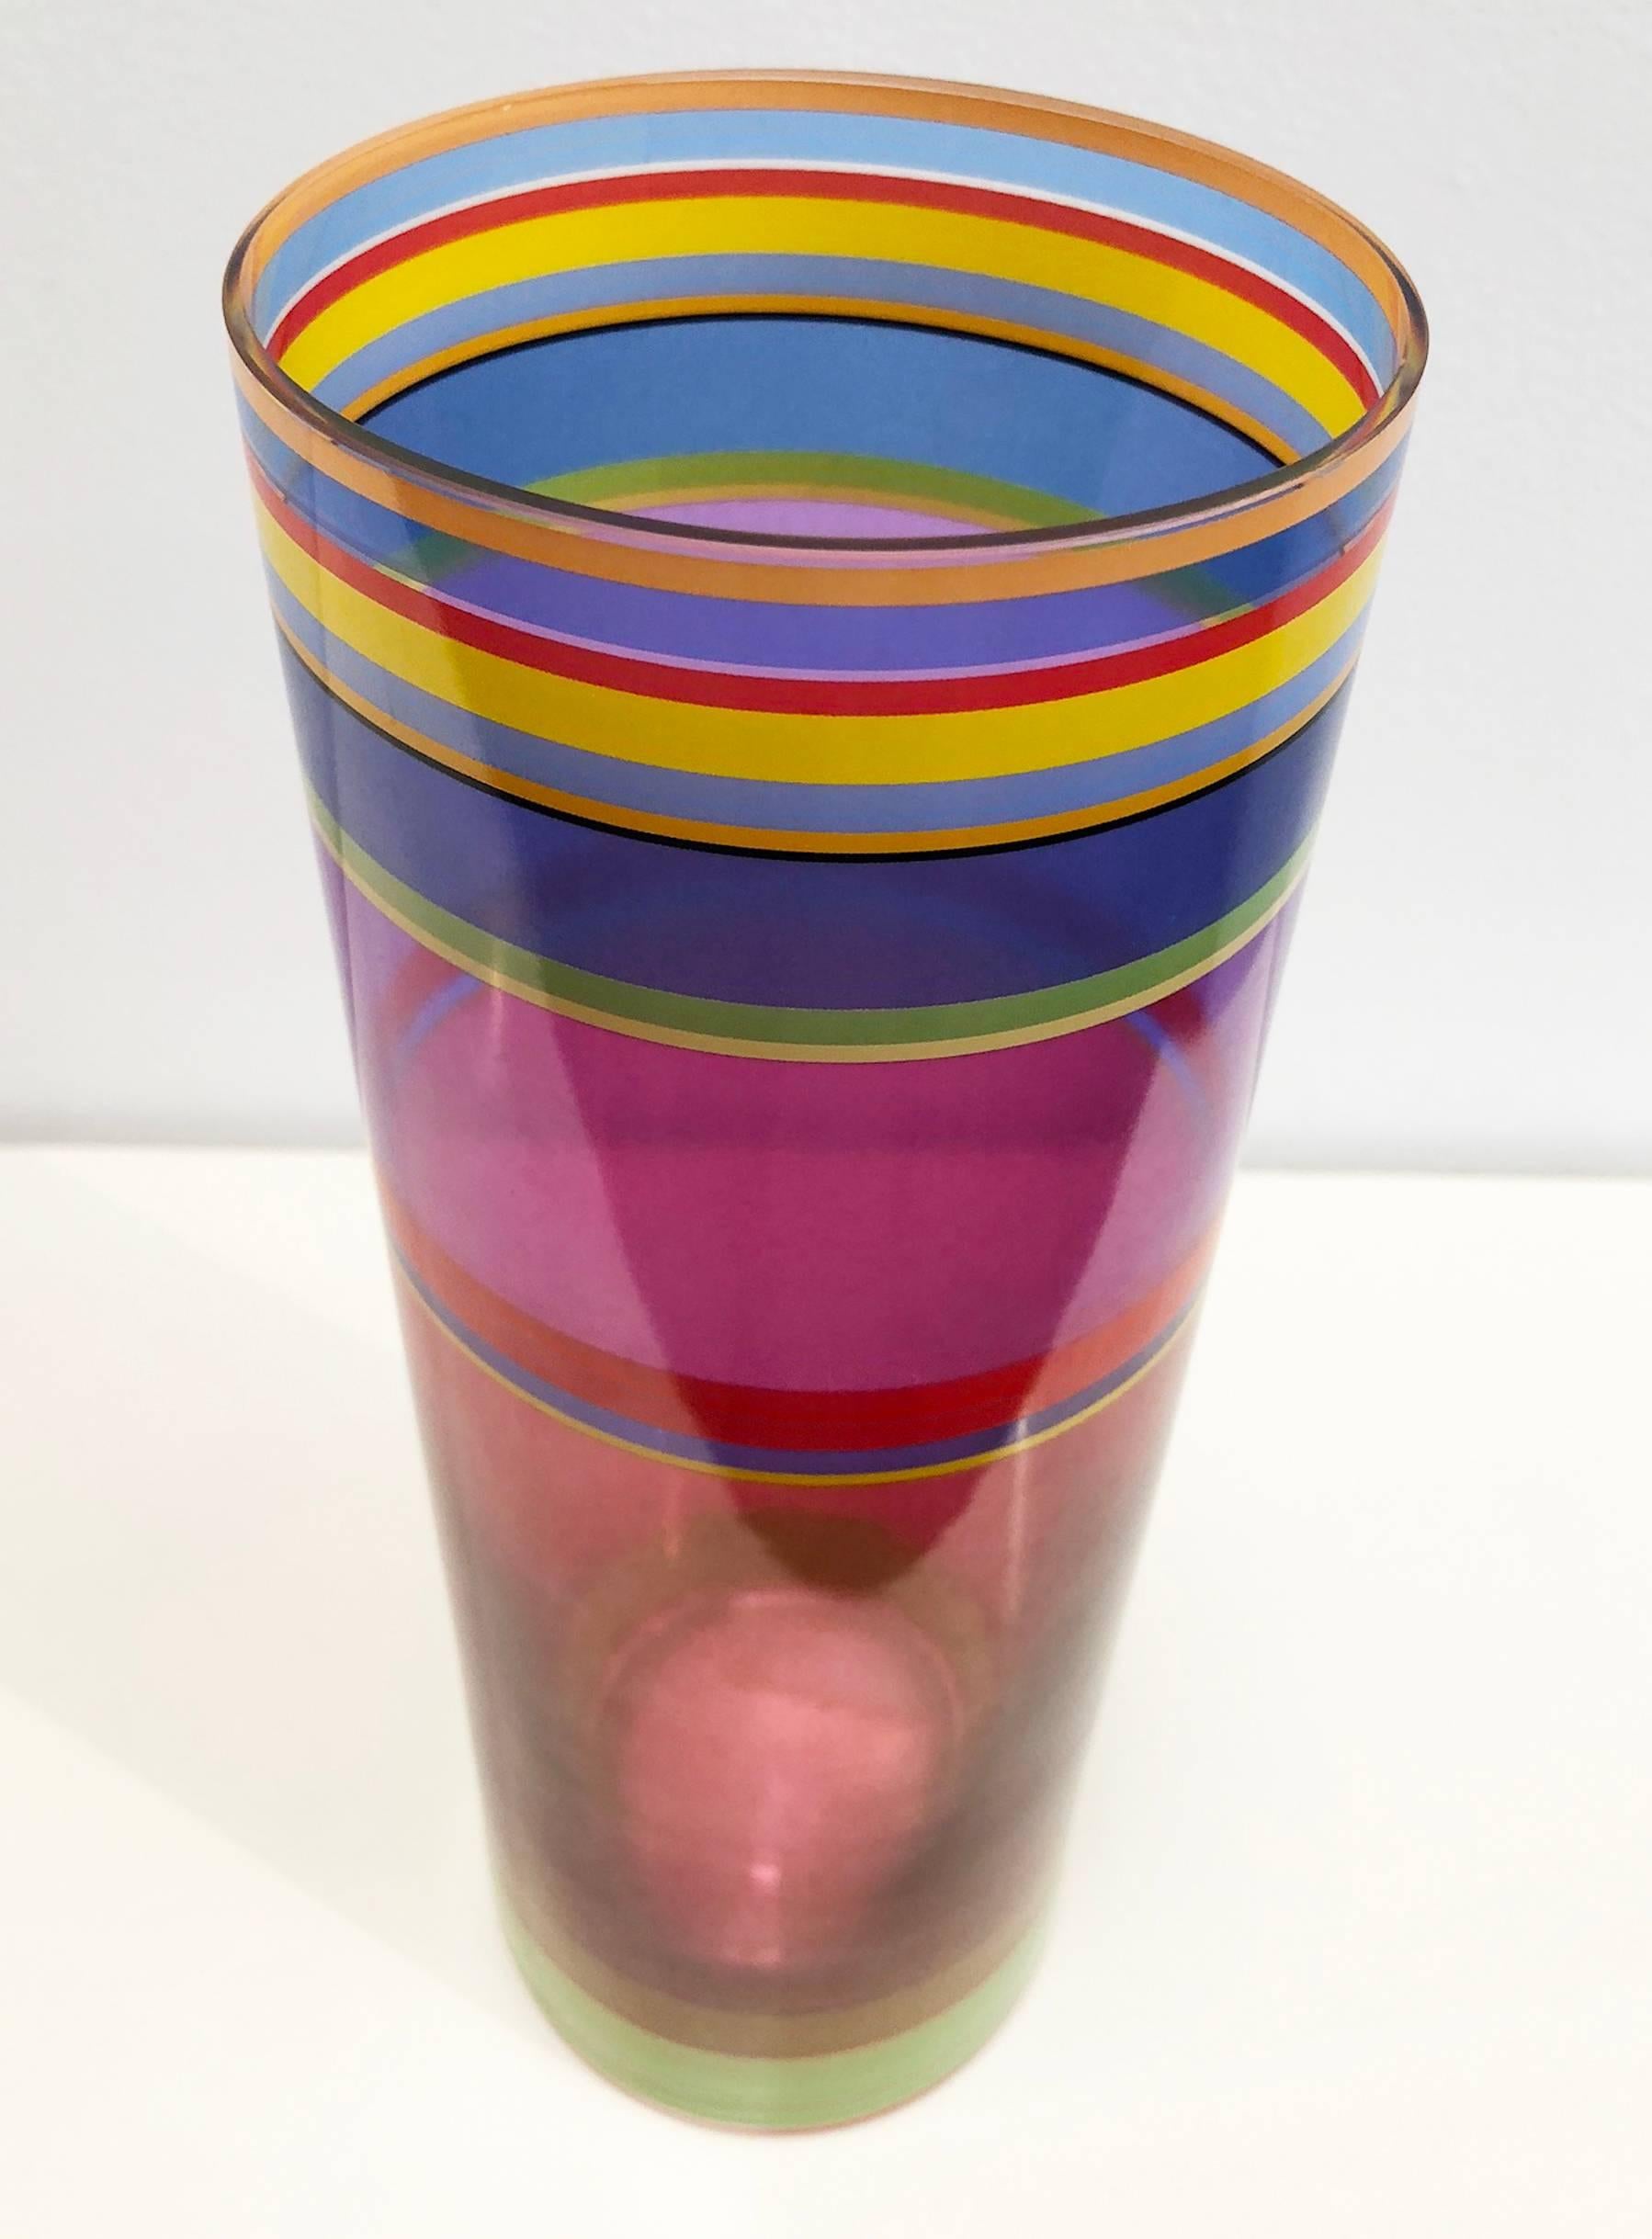 Colorful glass vase. Signed Rosenthal Studio Line with signature of artist Nicholas Bodde.